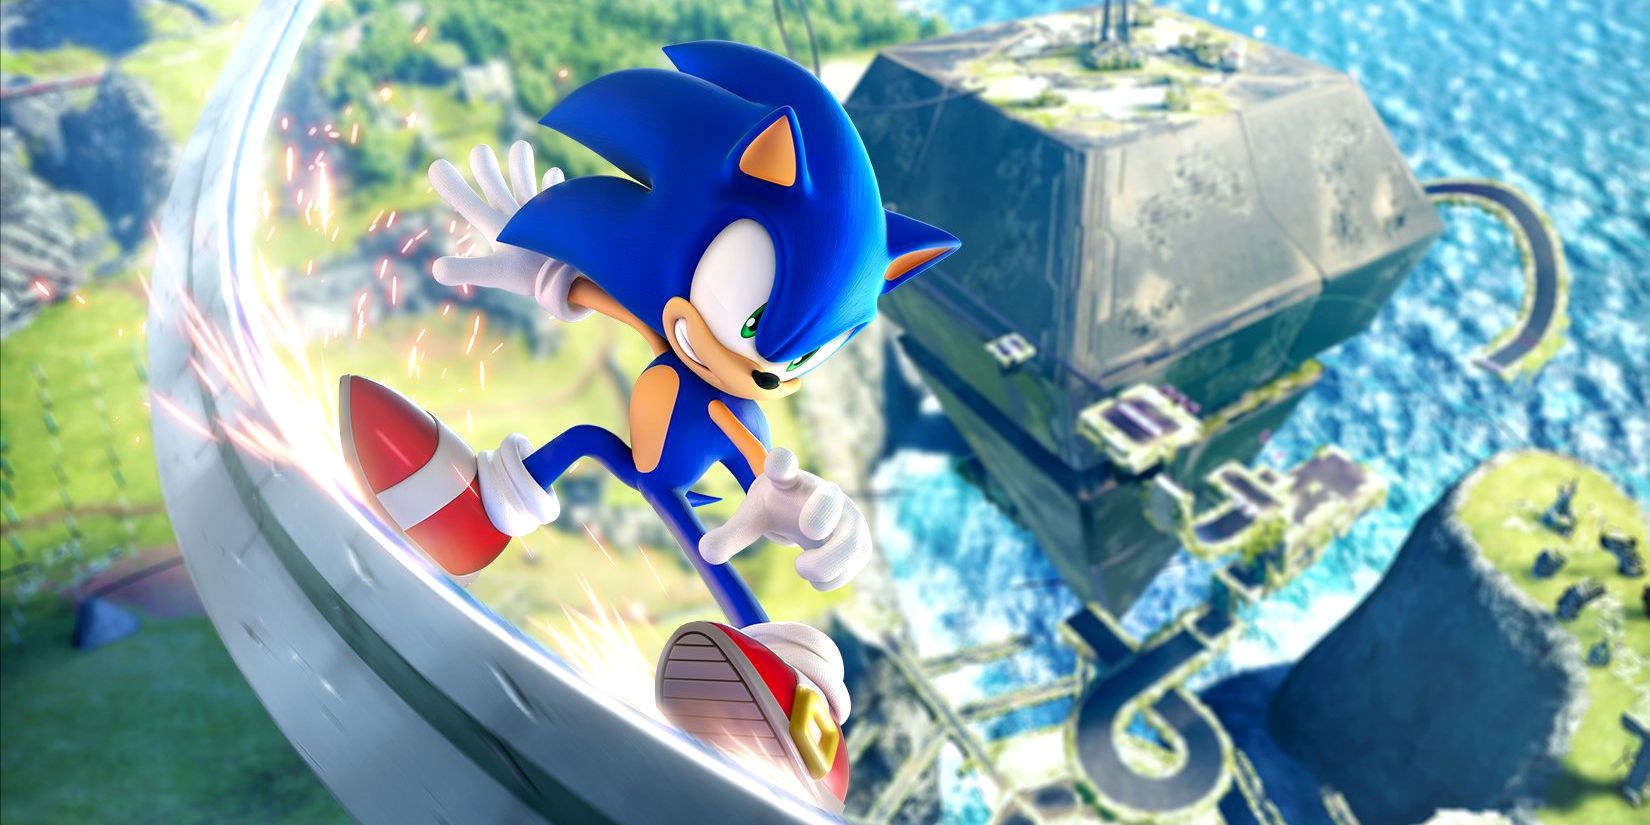 Sonic The Hedgehog grinding on a rail in promotional art from Sonic Frontiers